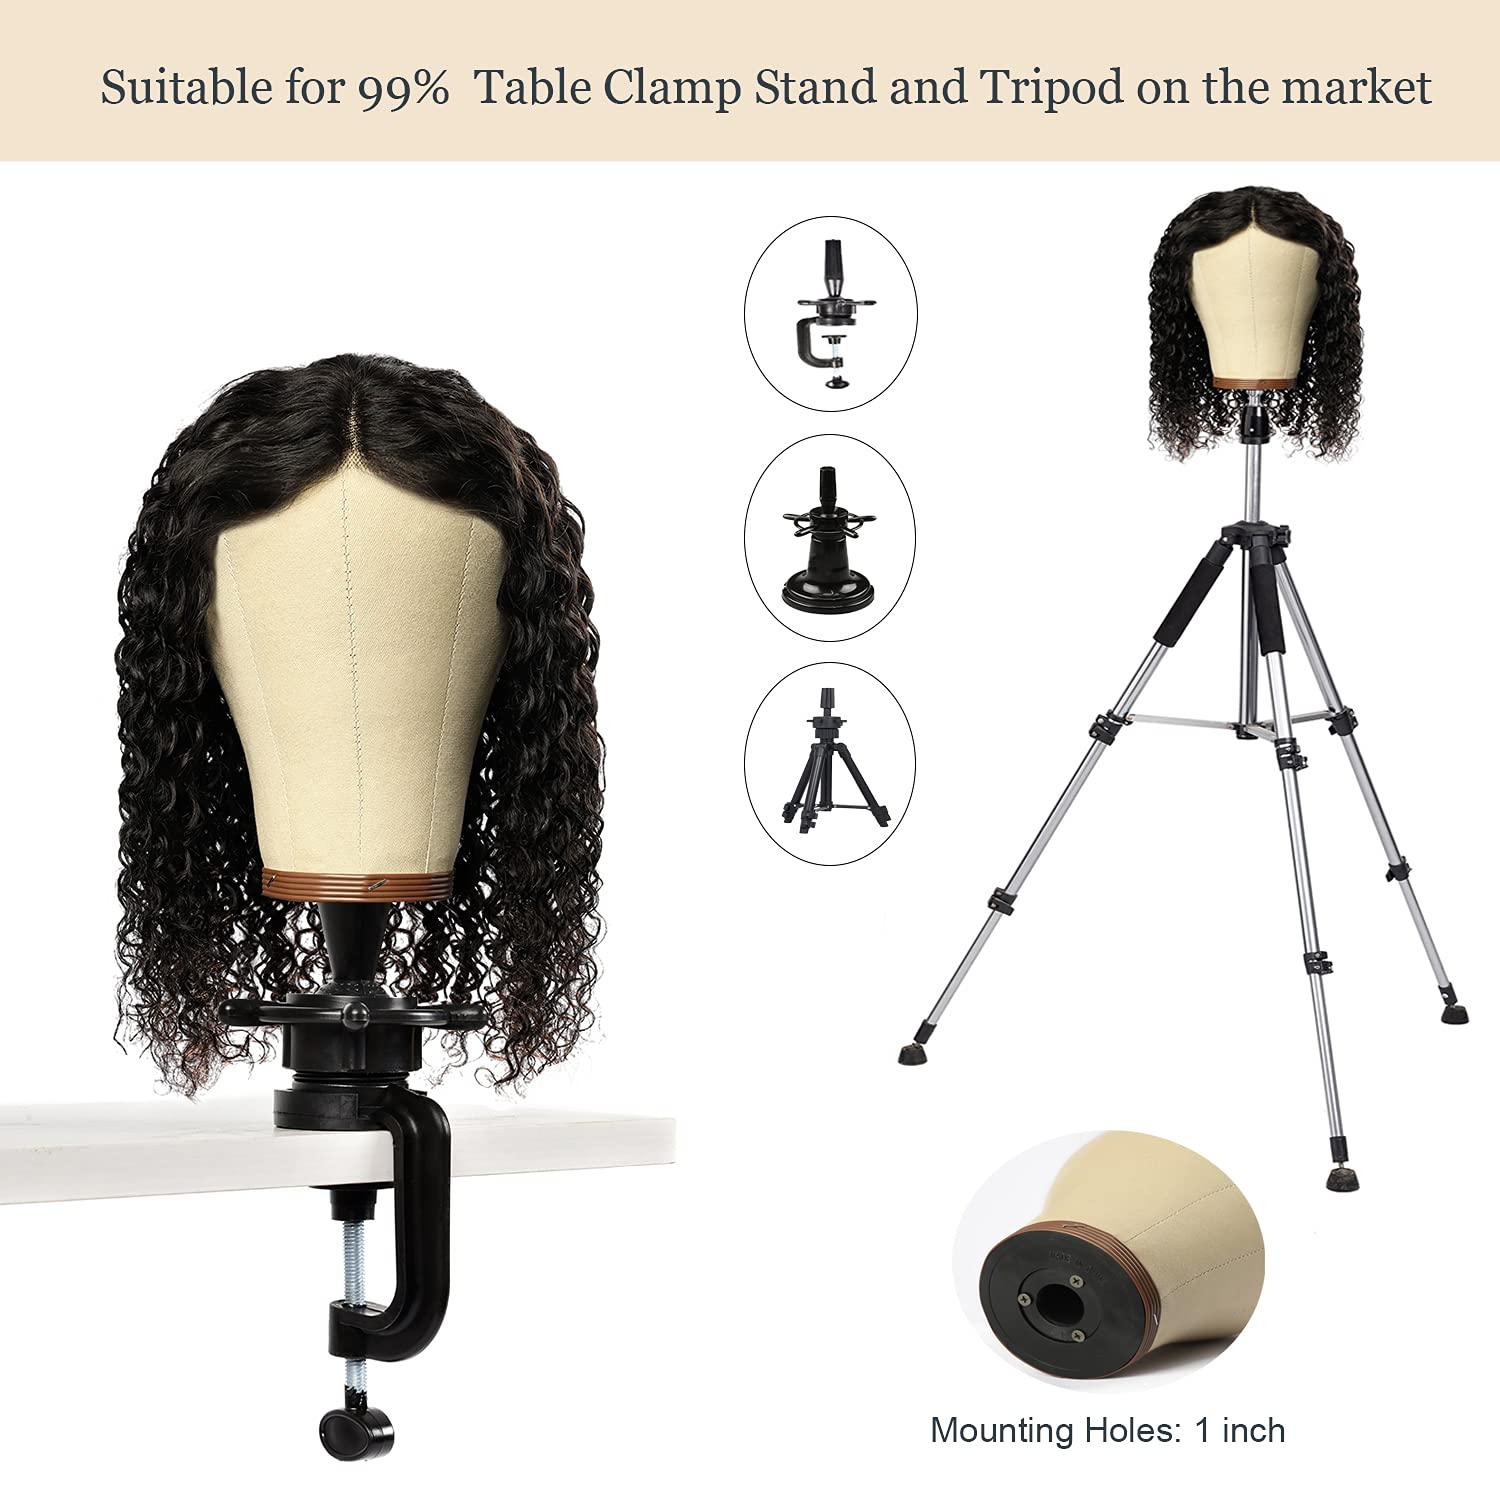 lucicass Wig Head 24Incn Canvas Block Head Wig Stand with Mannequin head  for Making Wigs Display Styling Wig Head with Mount Hole